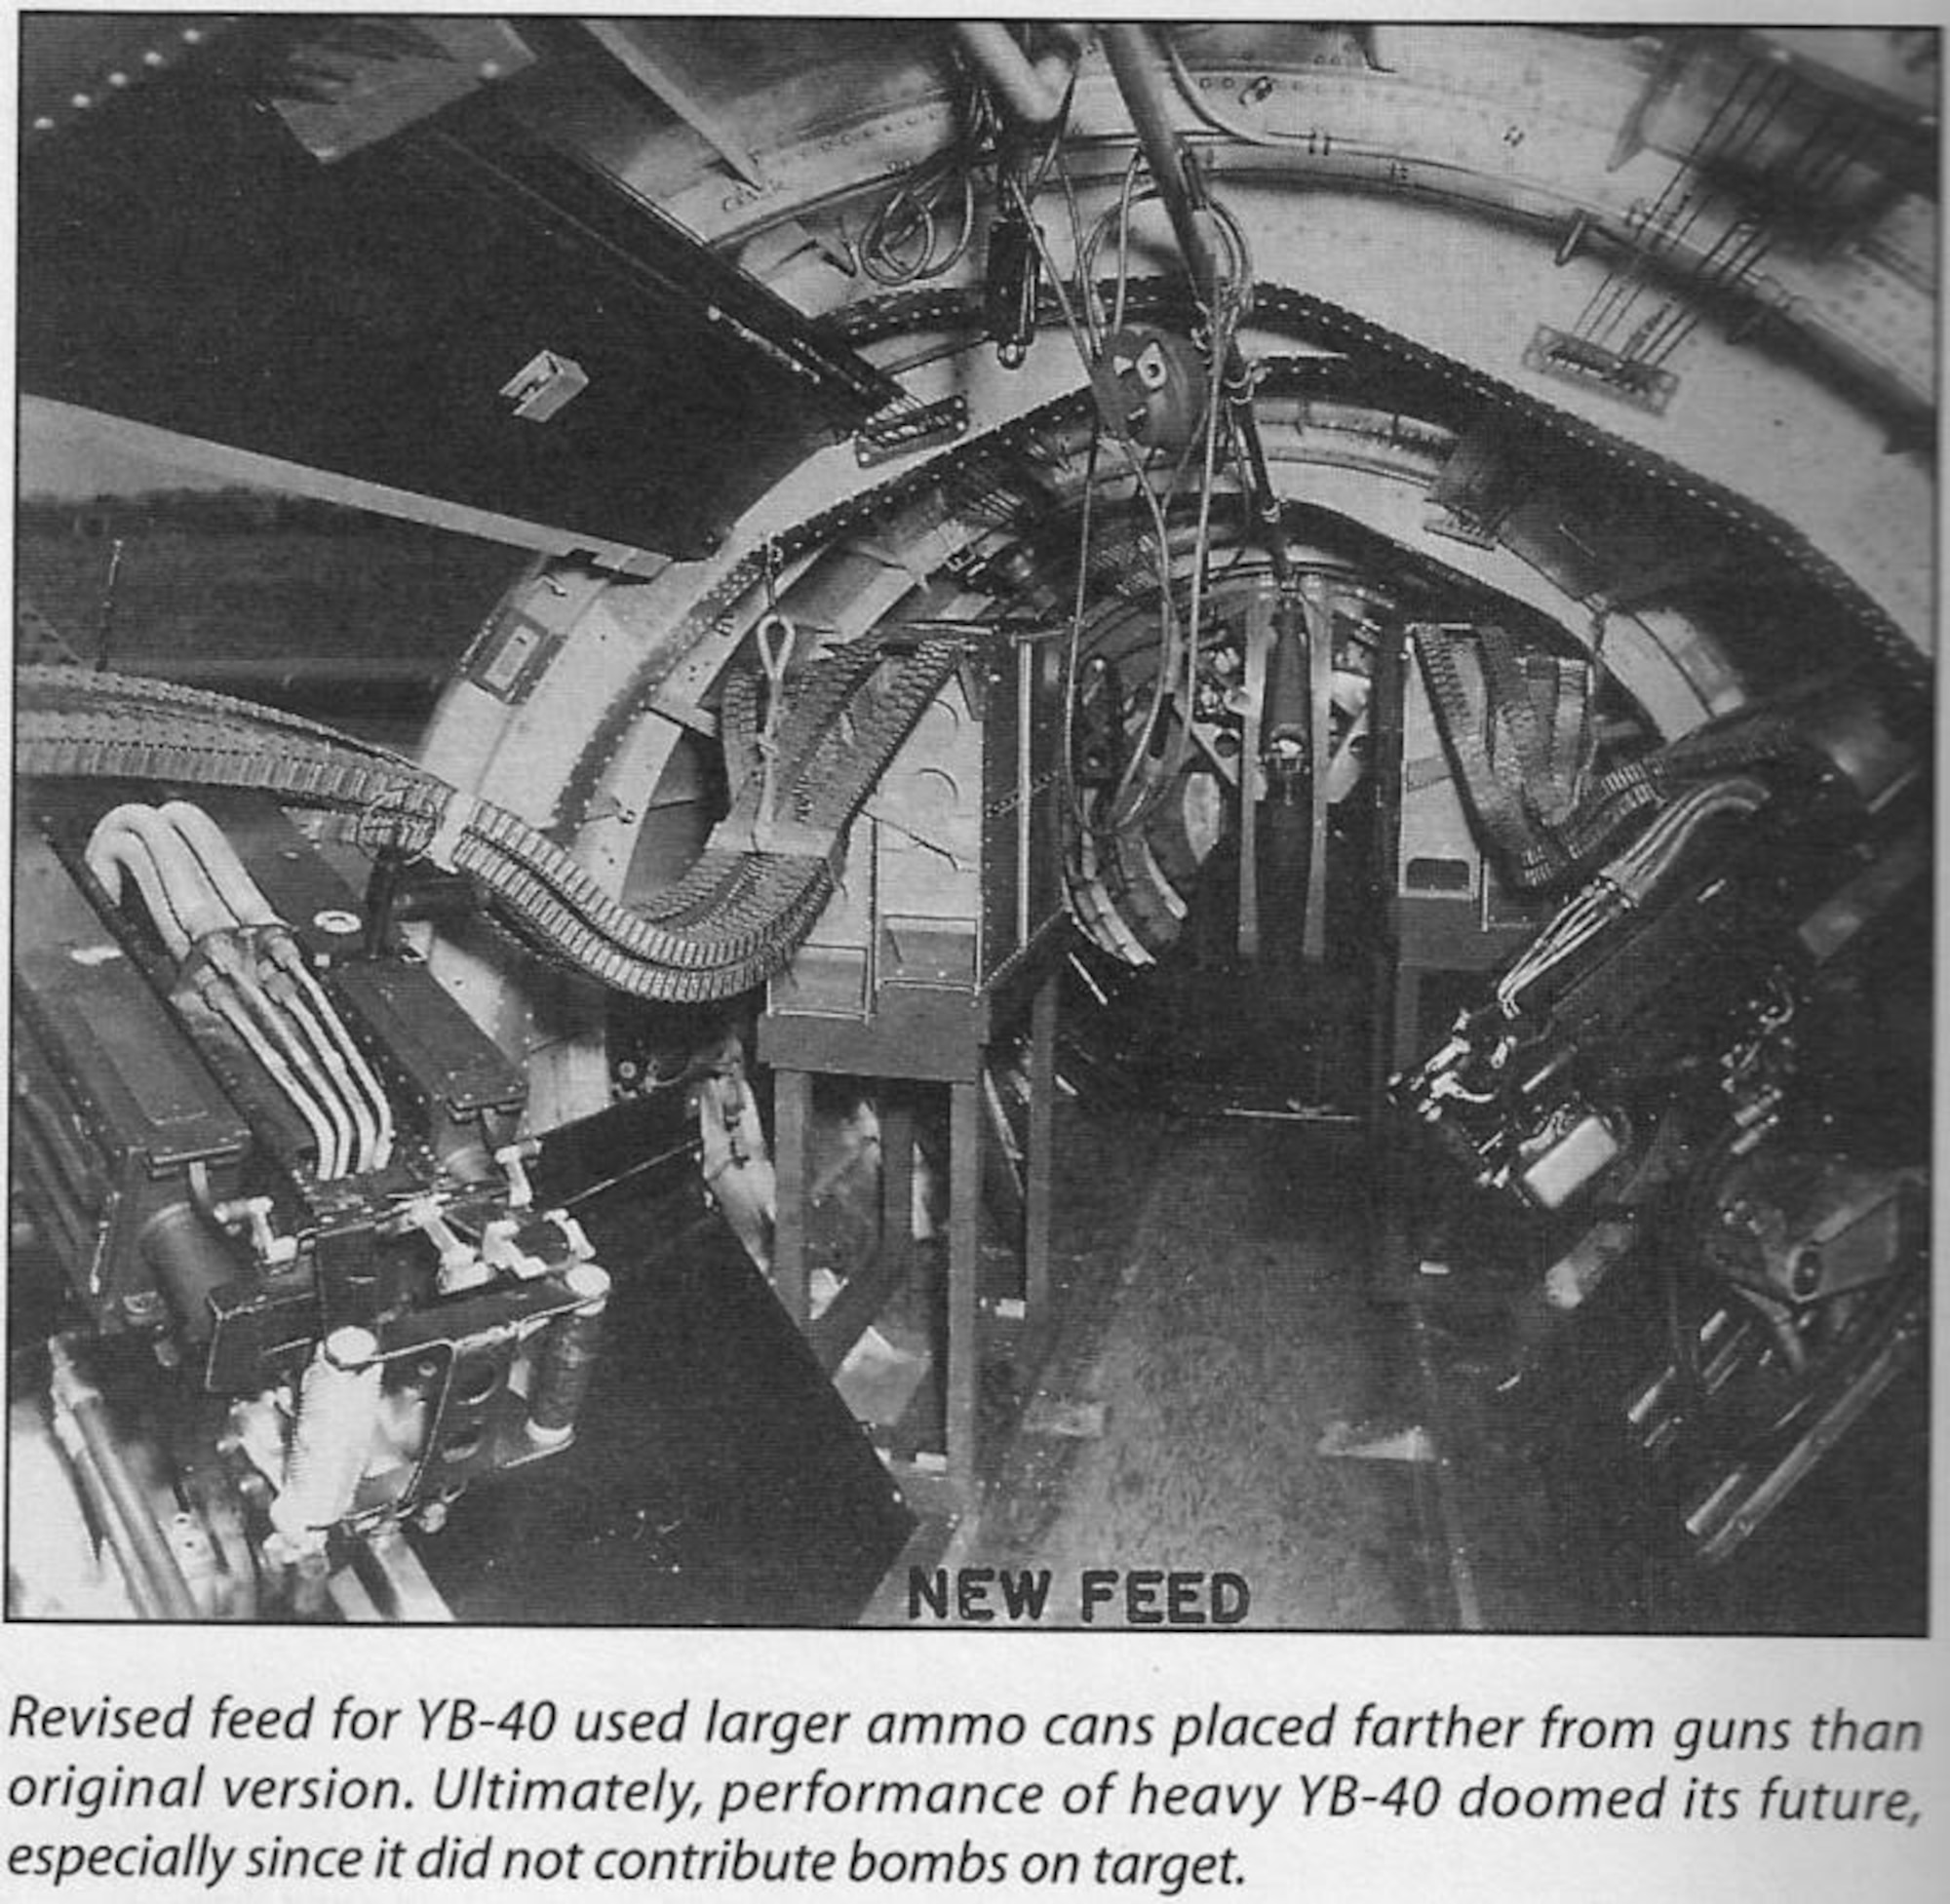 Courtesy Photo provided by 92nd Air Refueling Wing Historian